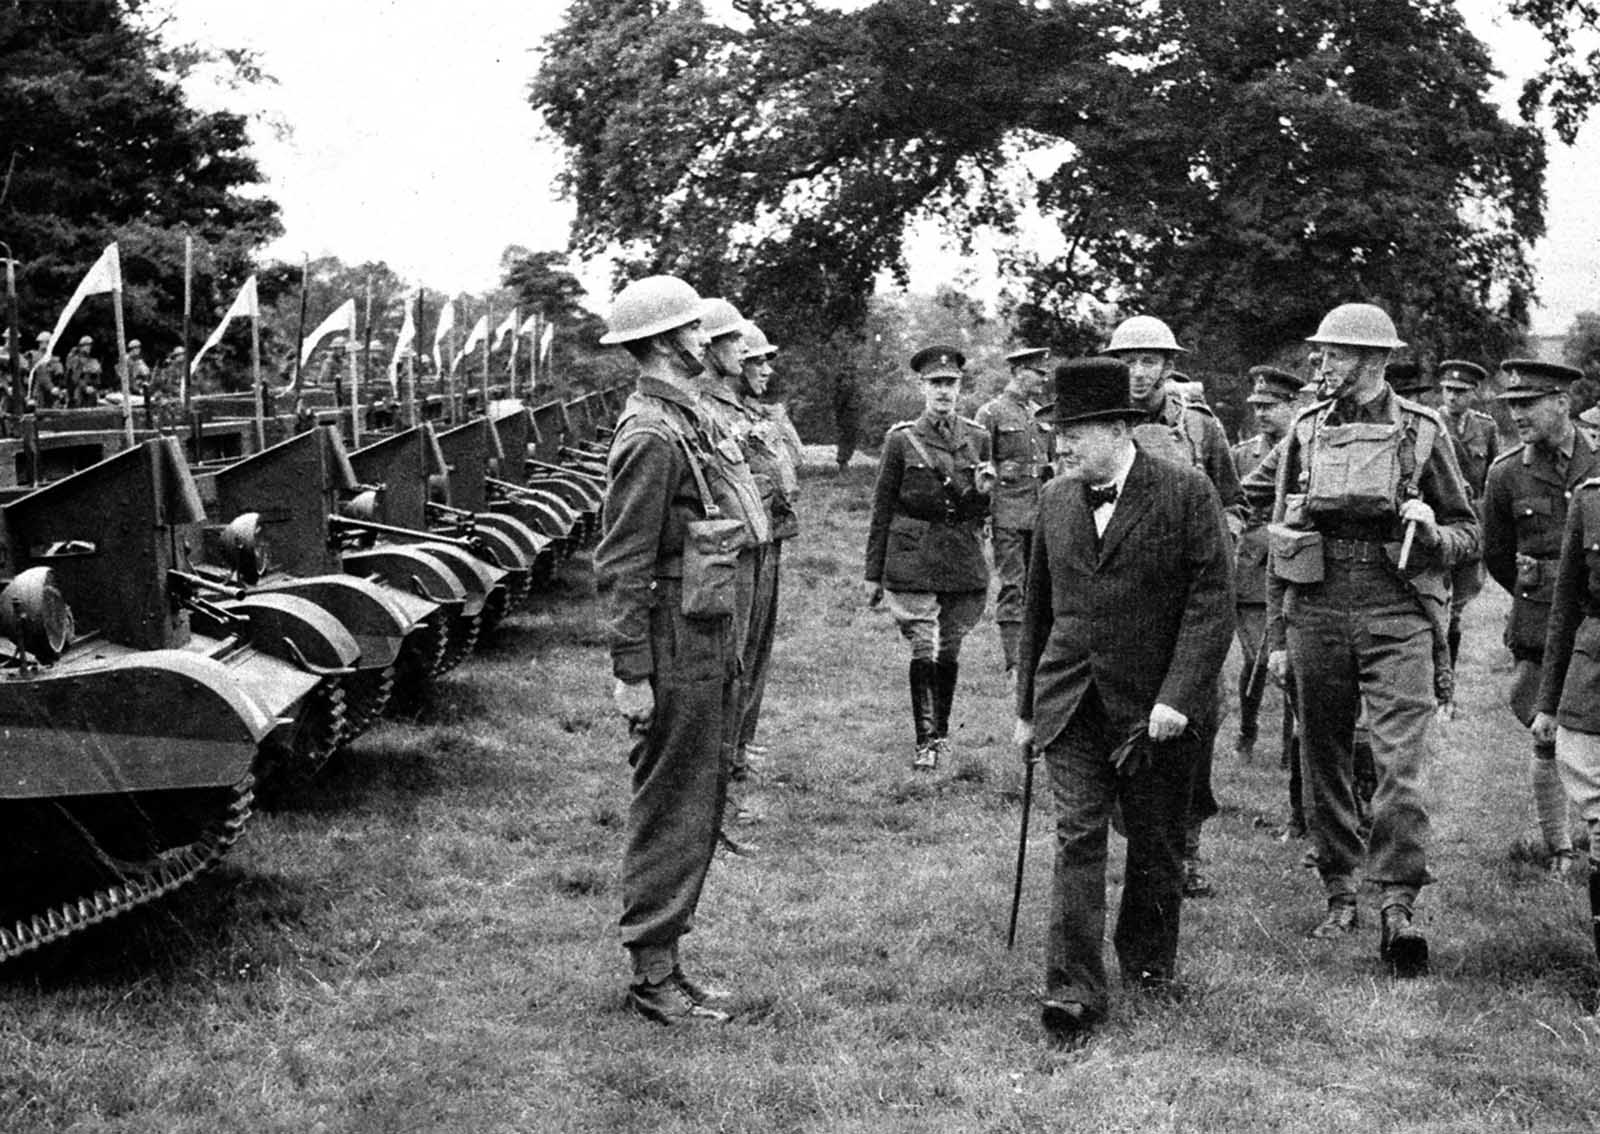 British Prime Minister Winston Churchill inspects Britain's Grenadier guards standing at attention in front of Light Bren gun armored units in July, 1940.